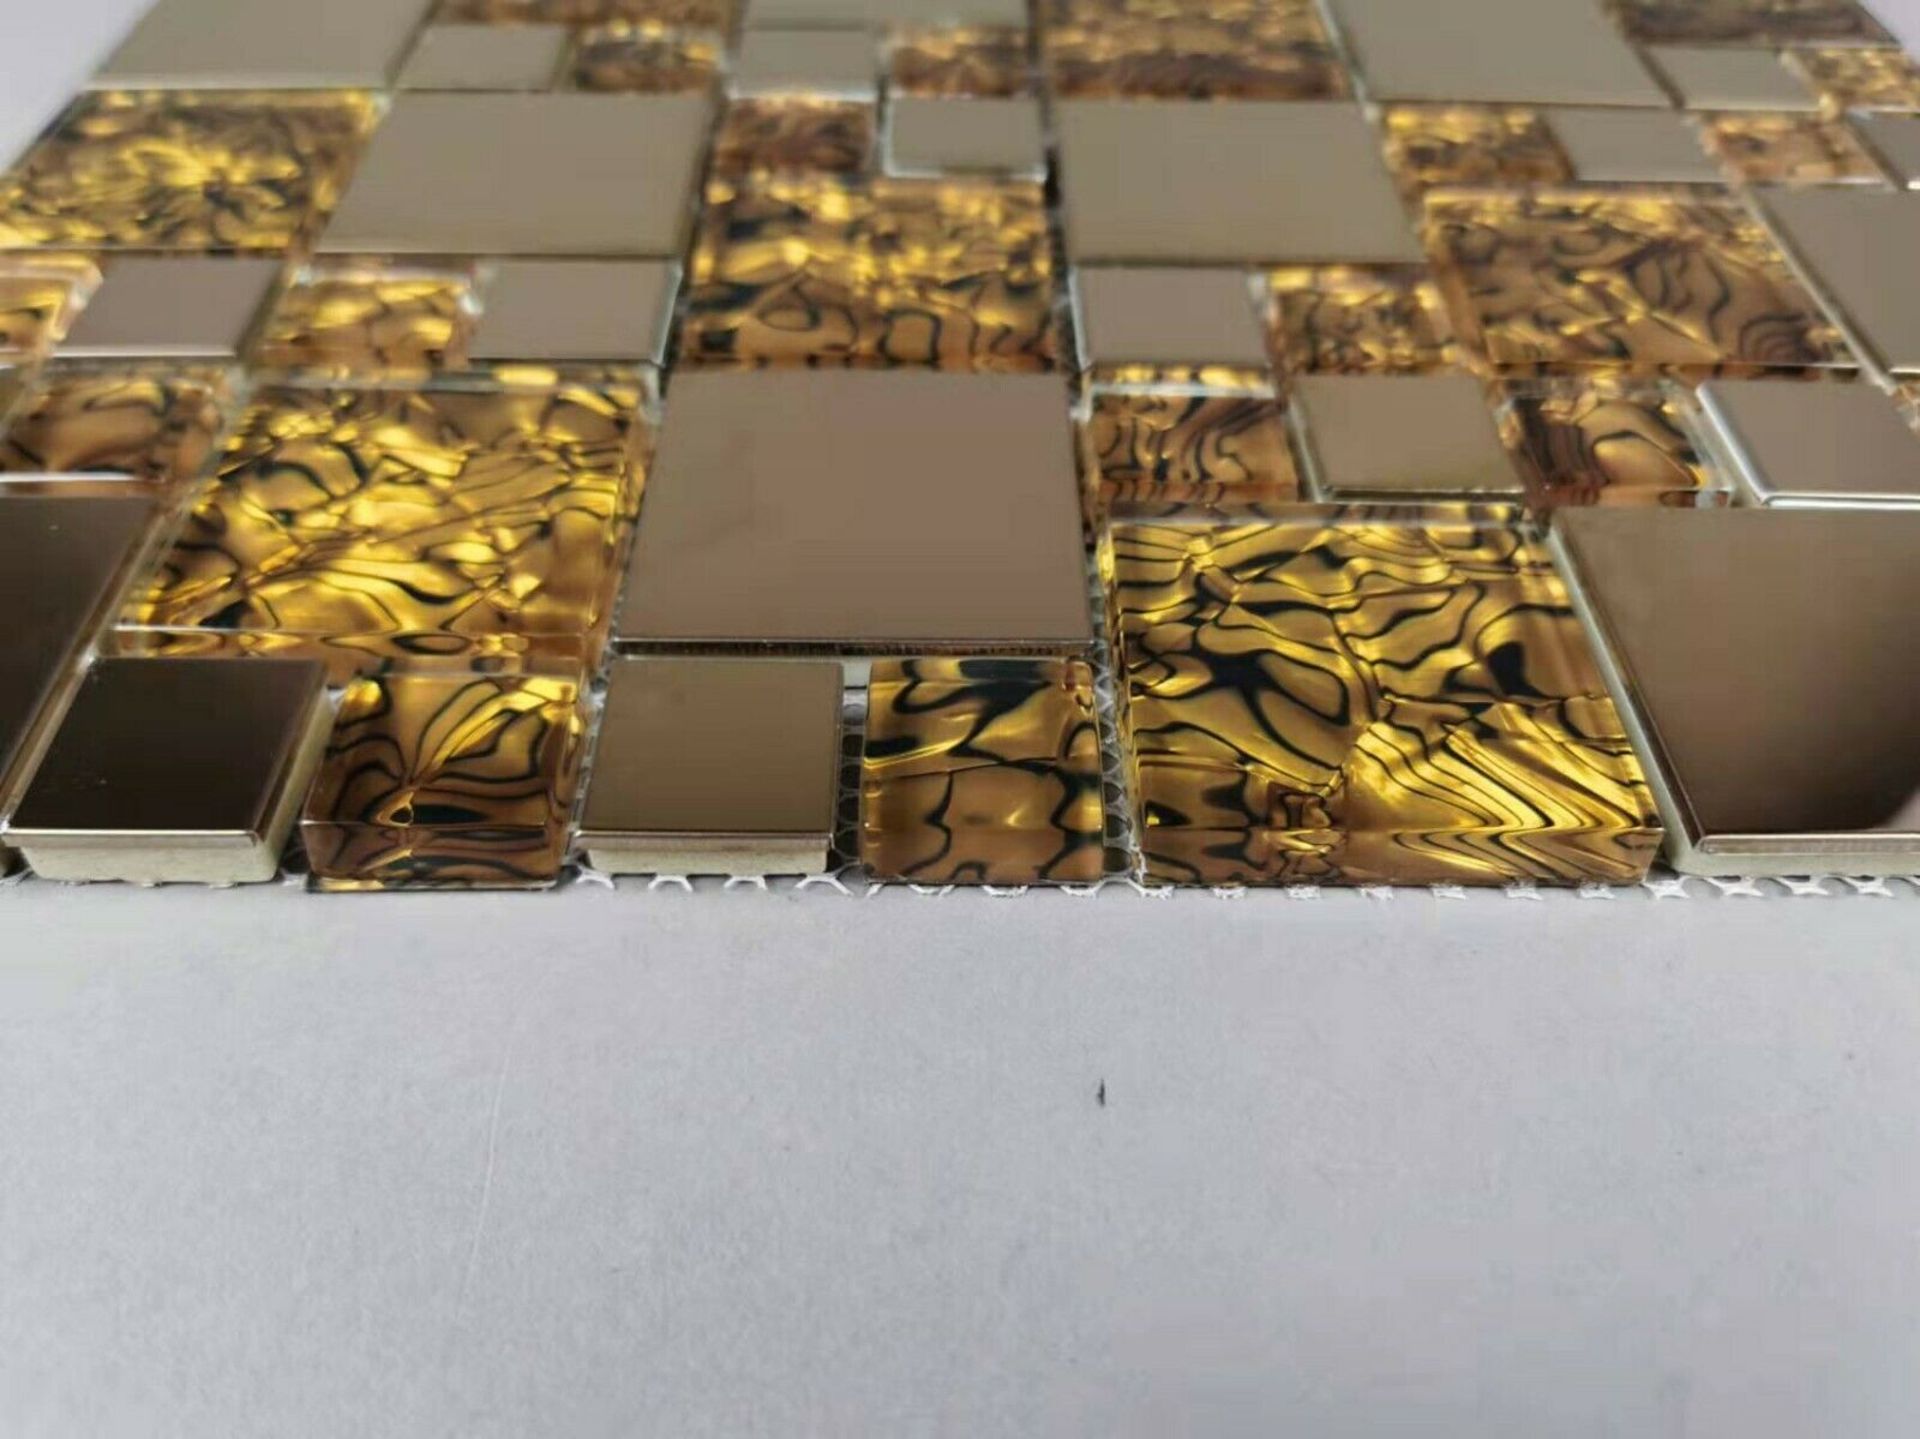 Stock Clearance High Quality Glass/Stainless Steel Mosaic Tiles - 11 Sheets - One Square Metre - Image 3 of 3